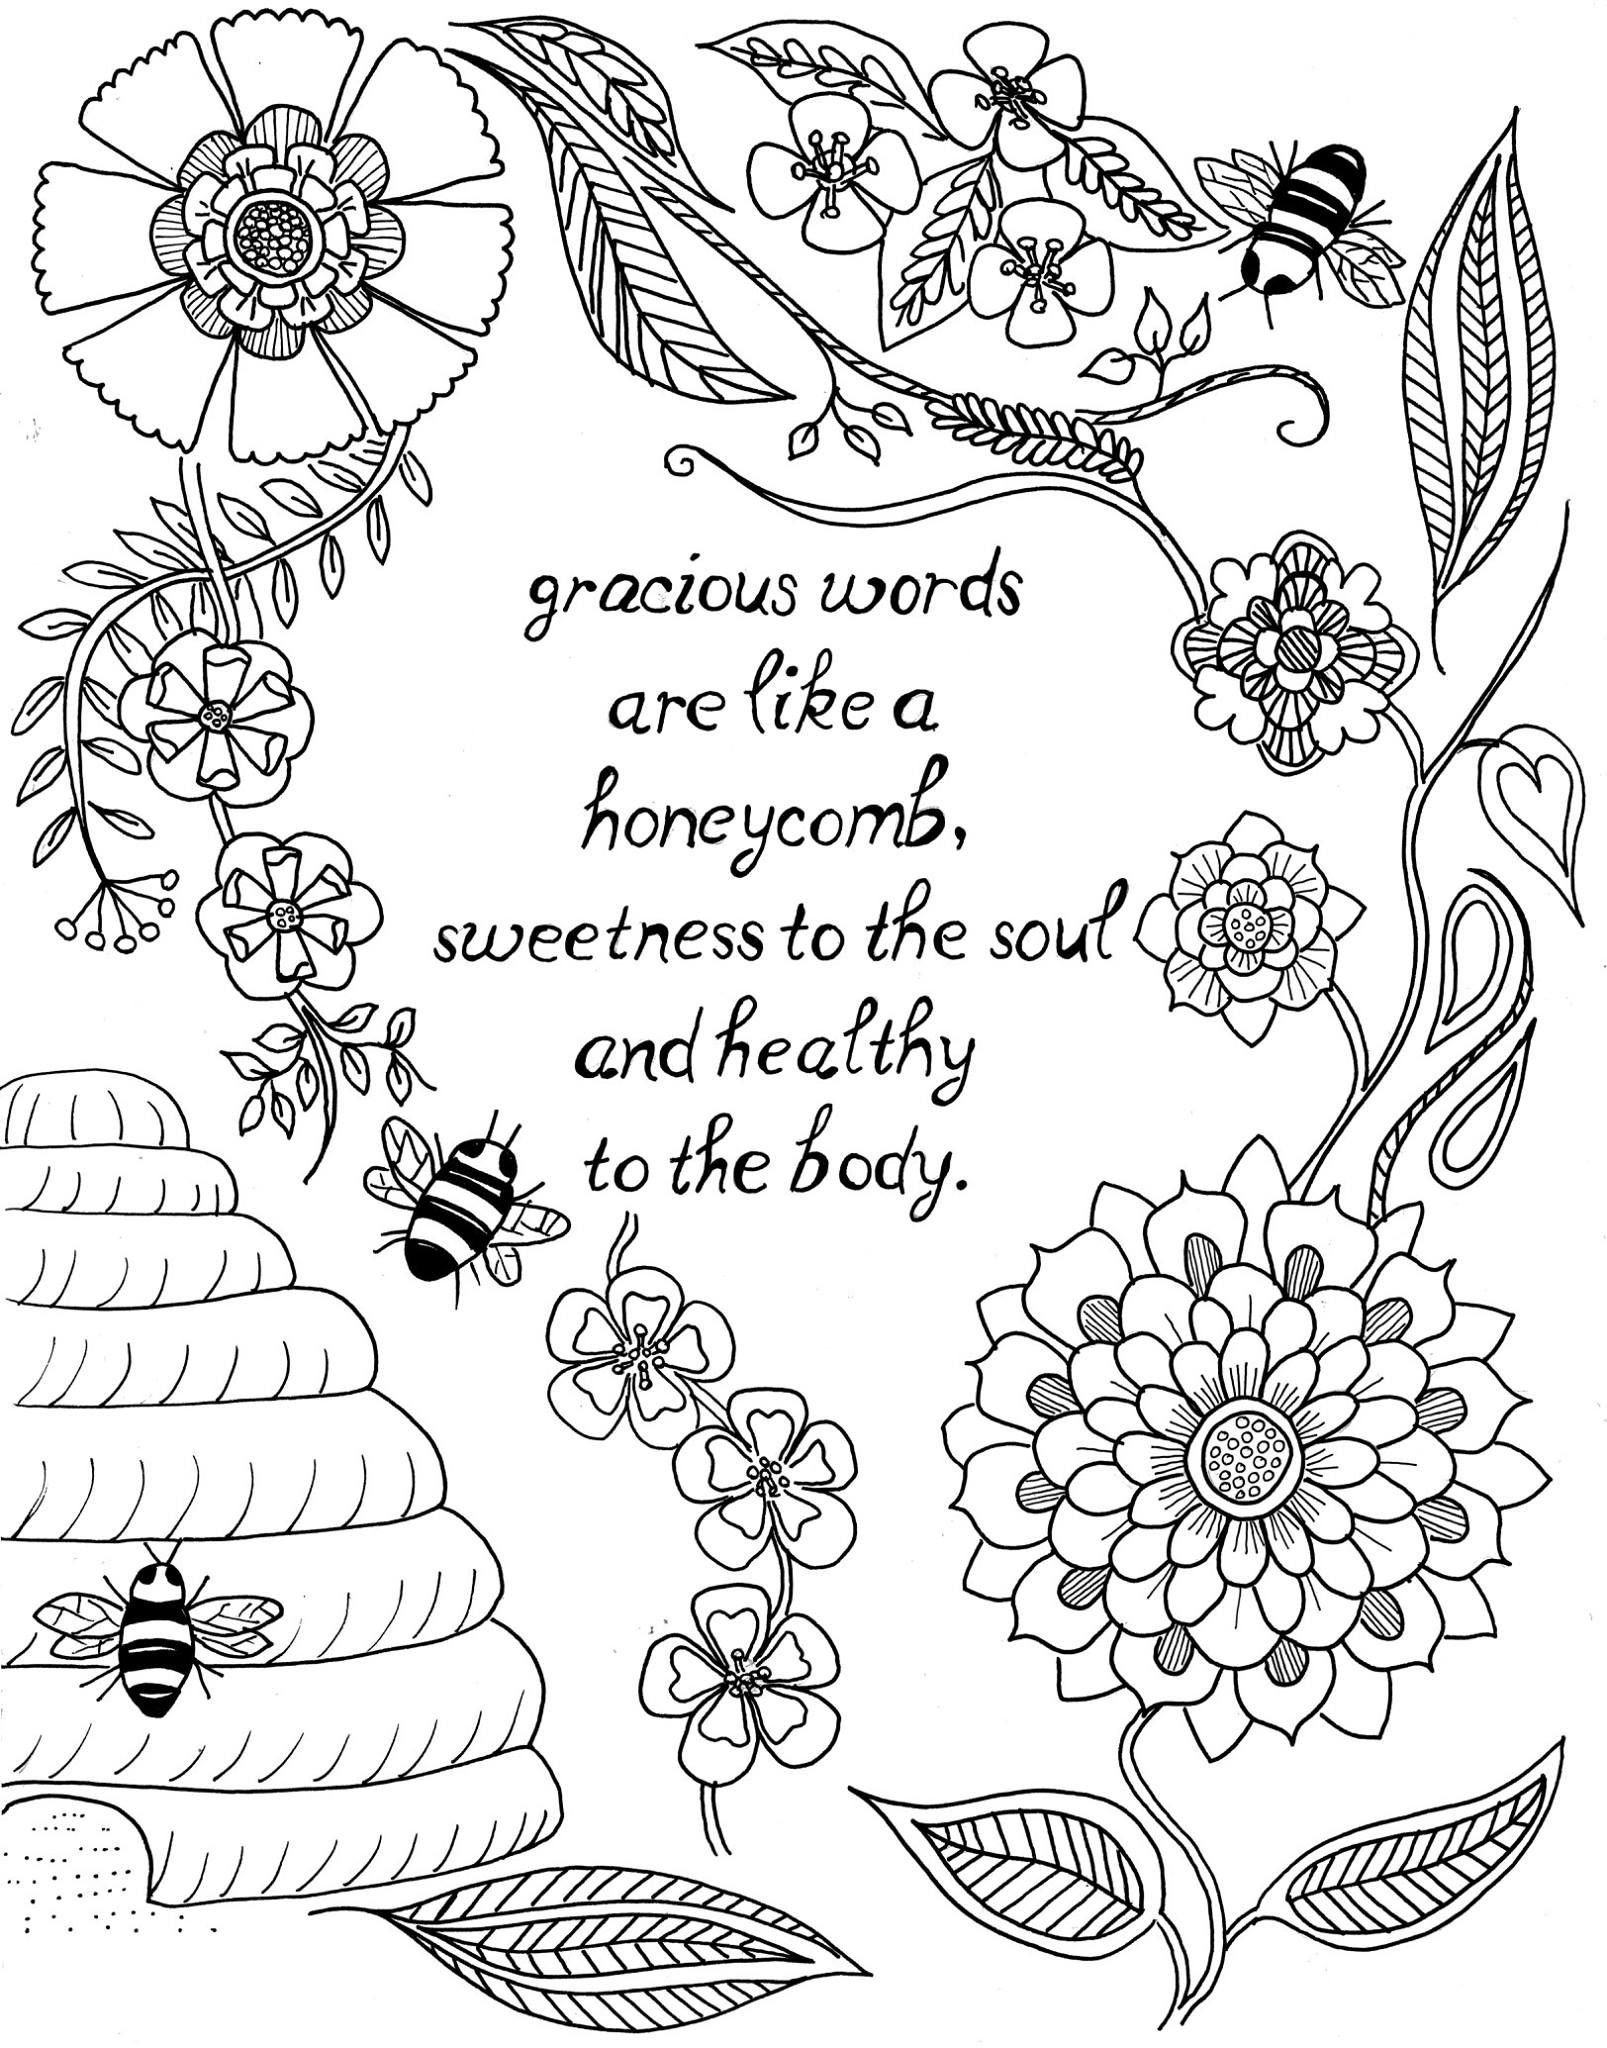 Bible Coloring Pages For Adults Pdf
 Adult Coloring Pages Biblical Scenes